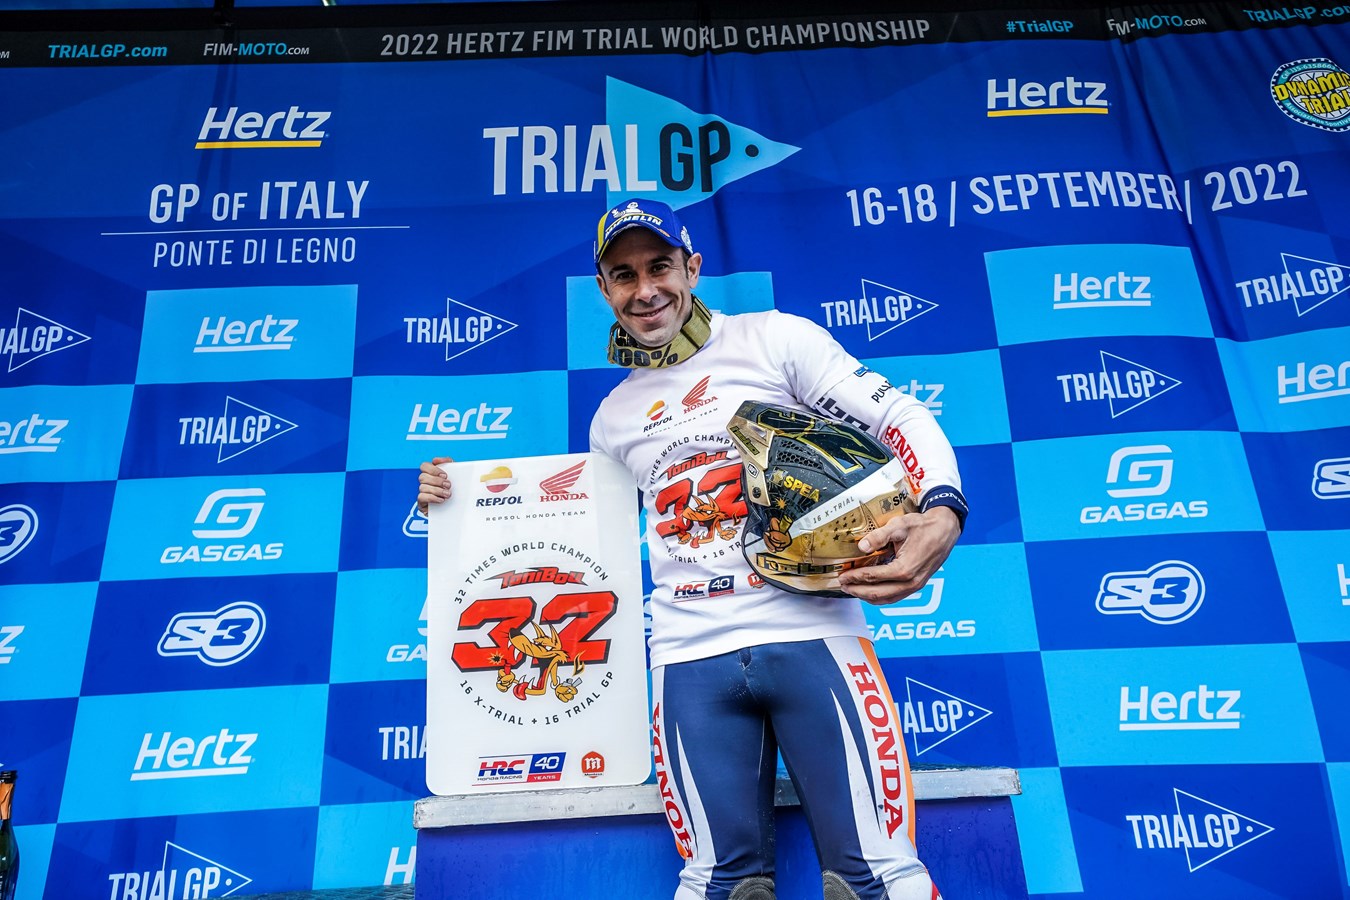 Toni Bou wins a 16th outdoor world title in Italy